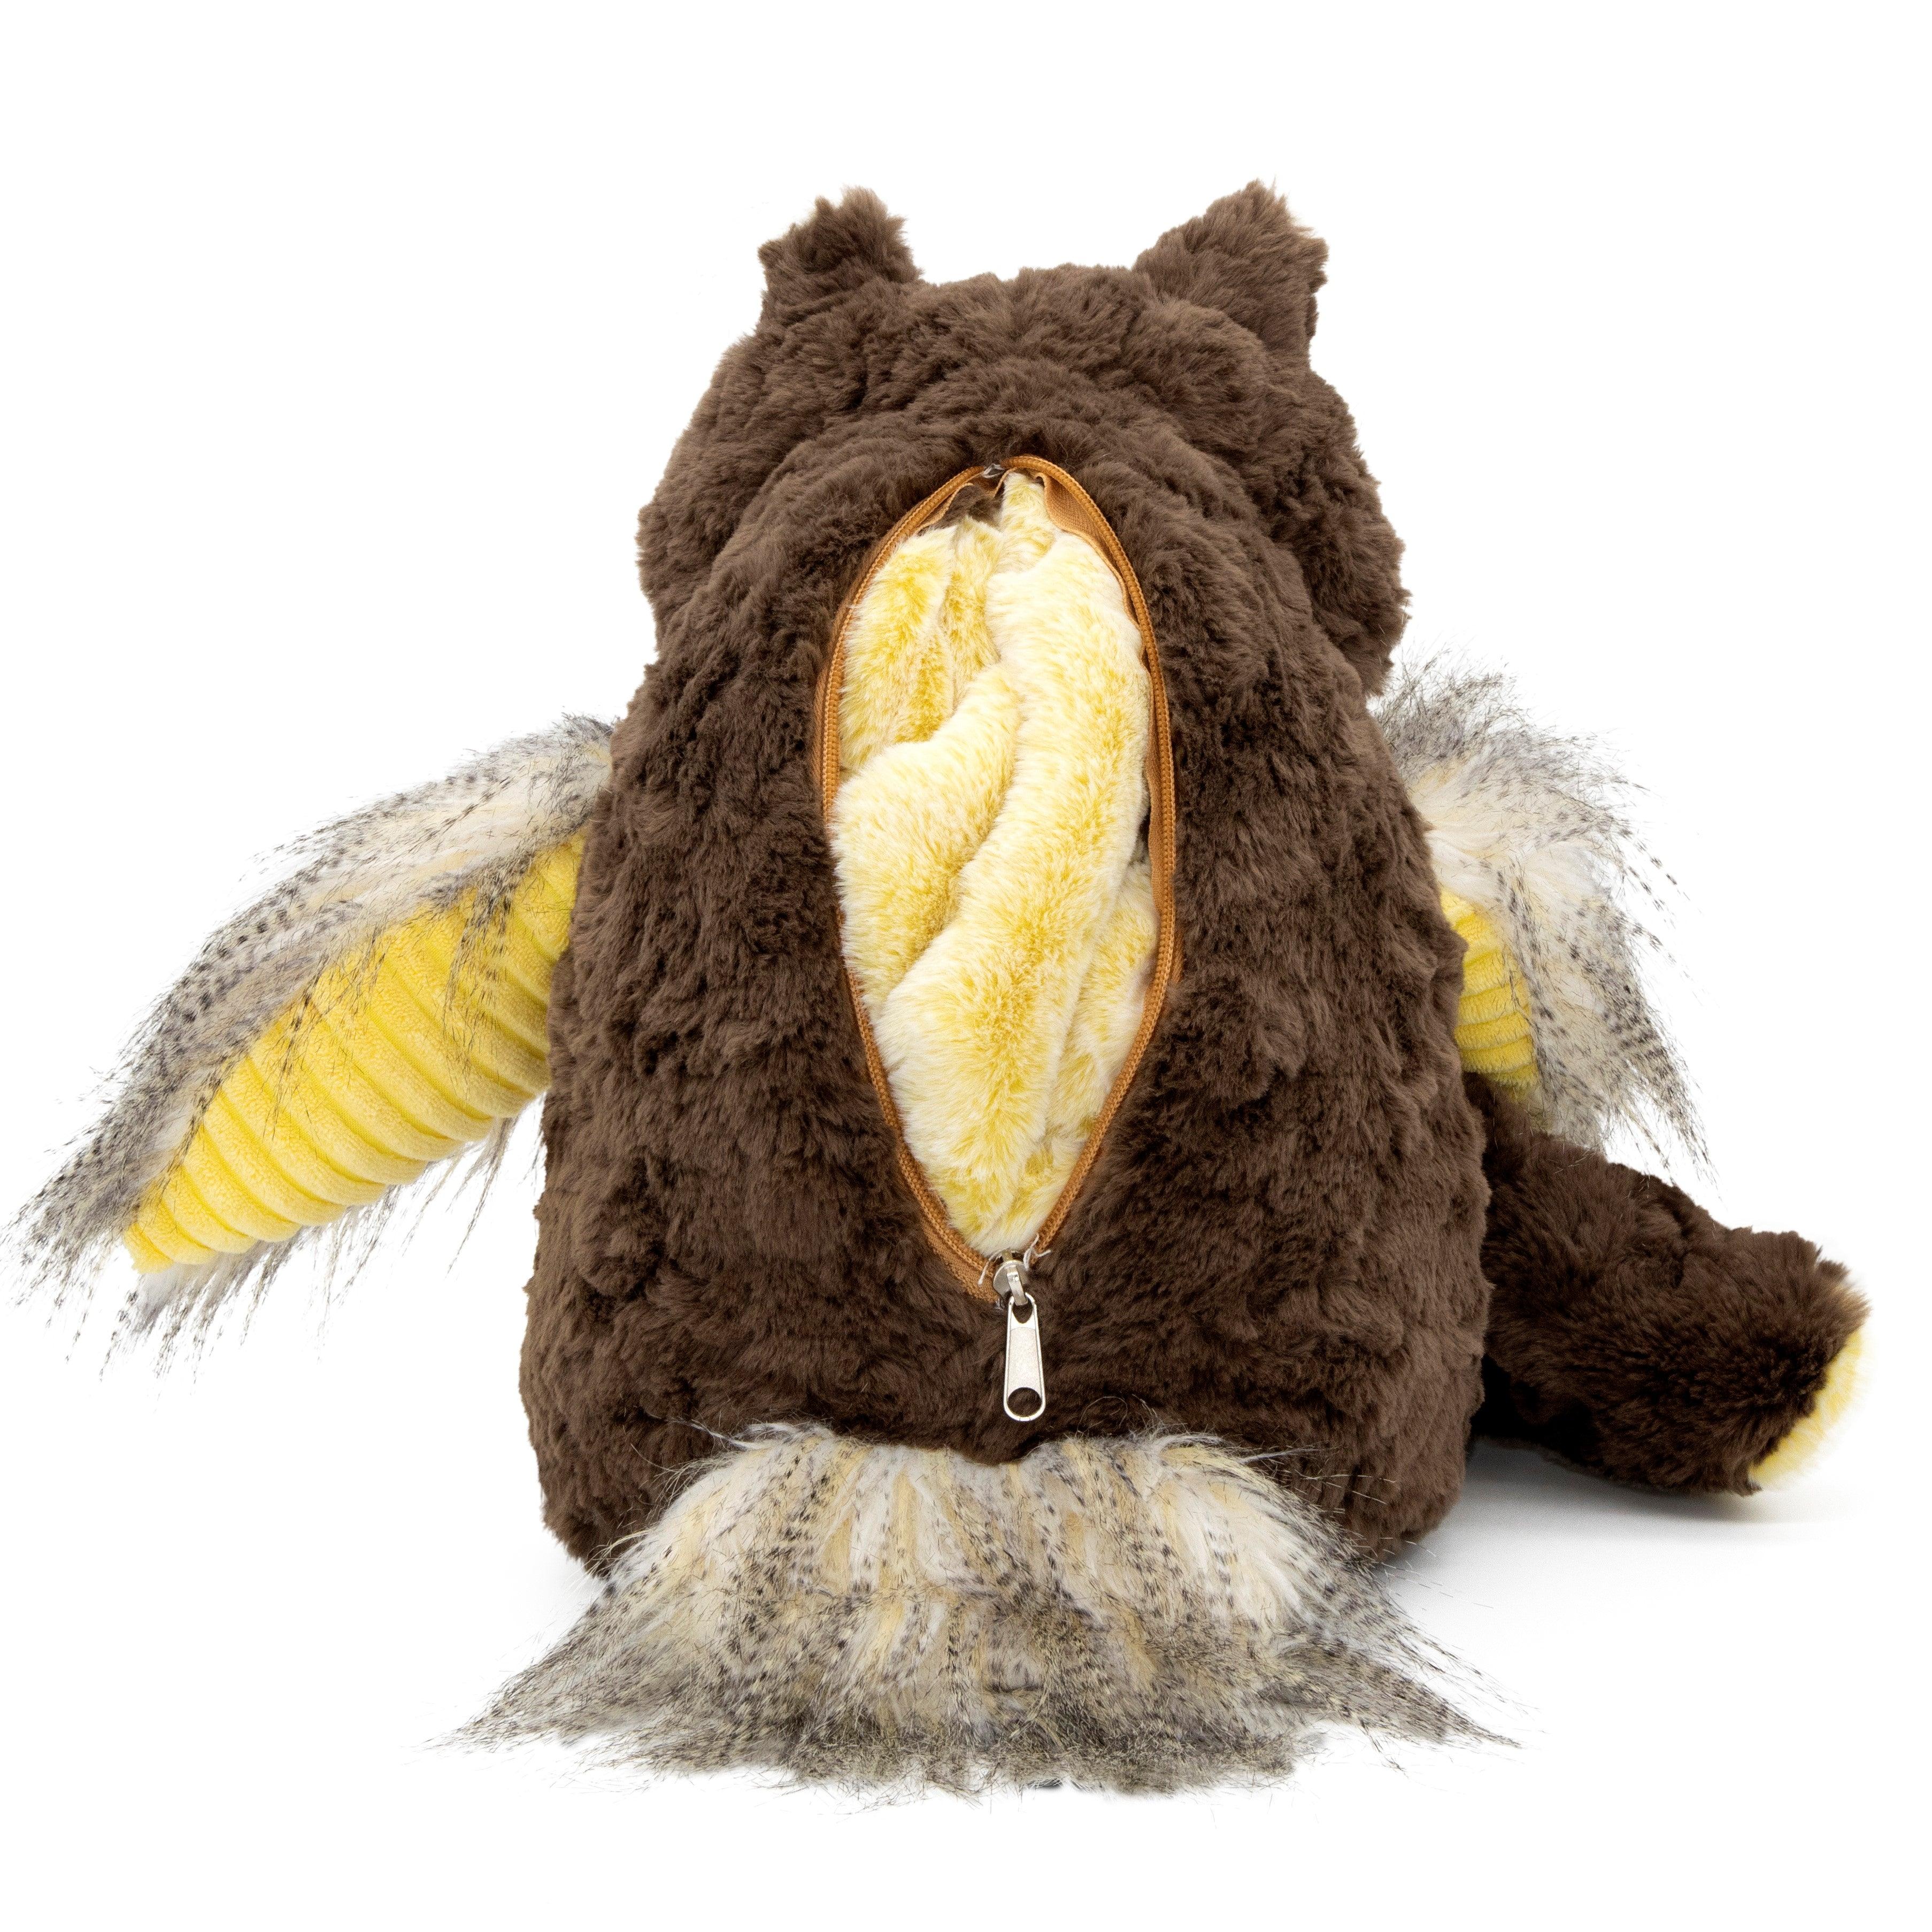 Plushible Blankie Bestie 2-in-1 Plush and Blanket Owliver the Owl - OrangeOnions Wholesale